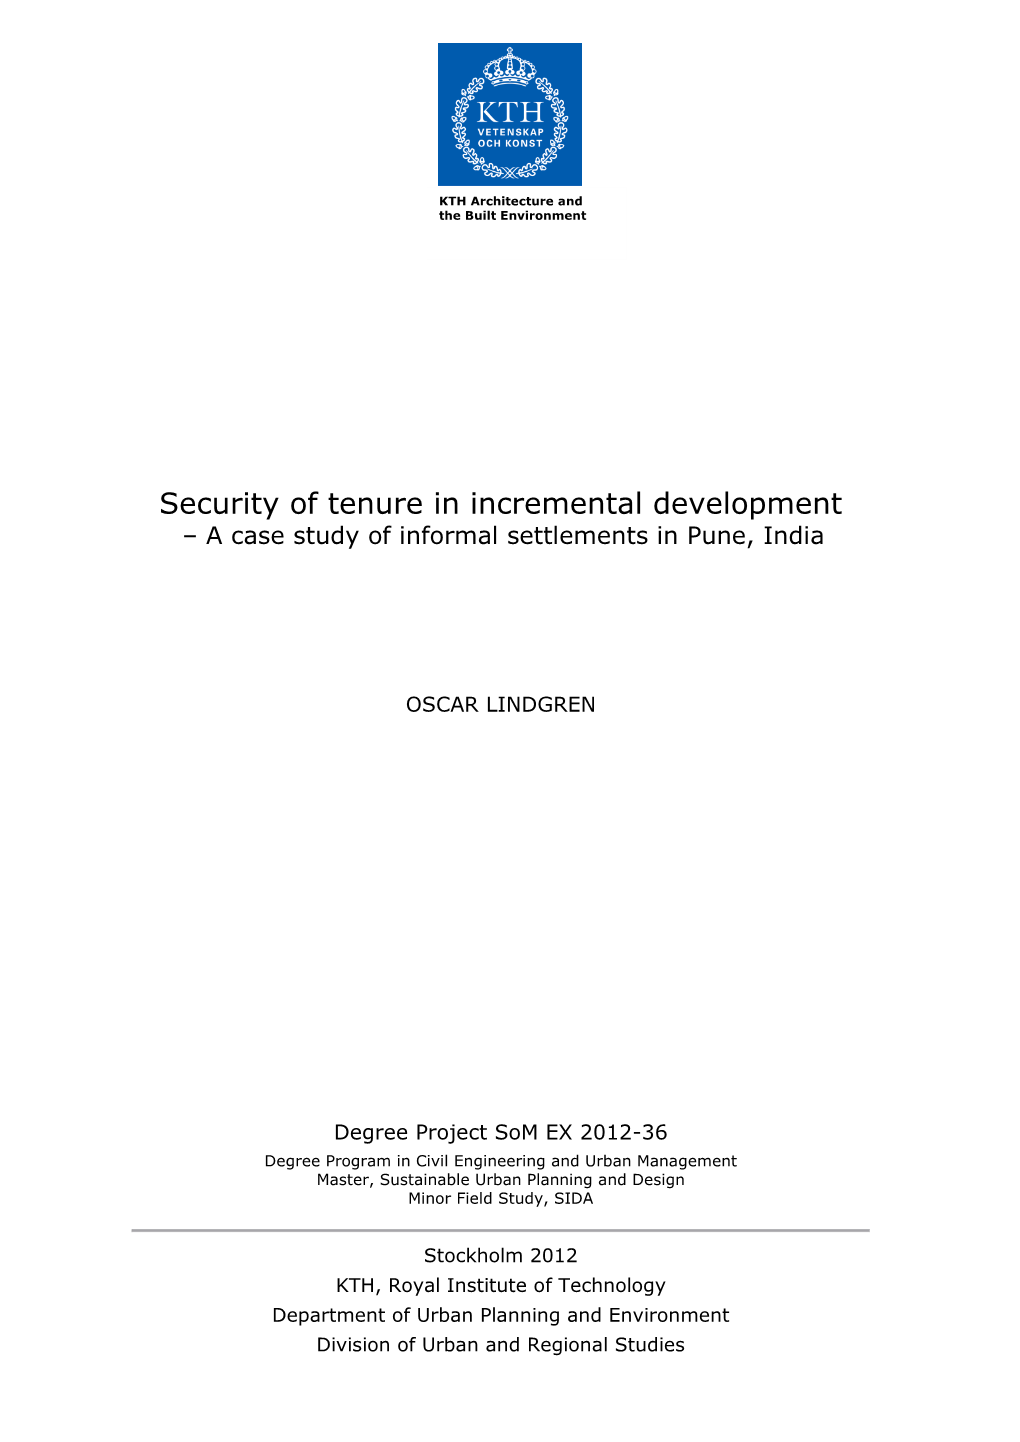 Security of Tenure in Incremental Development – a Case Study of Informal Settlements in Pune, India